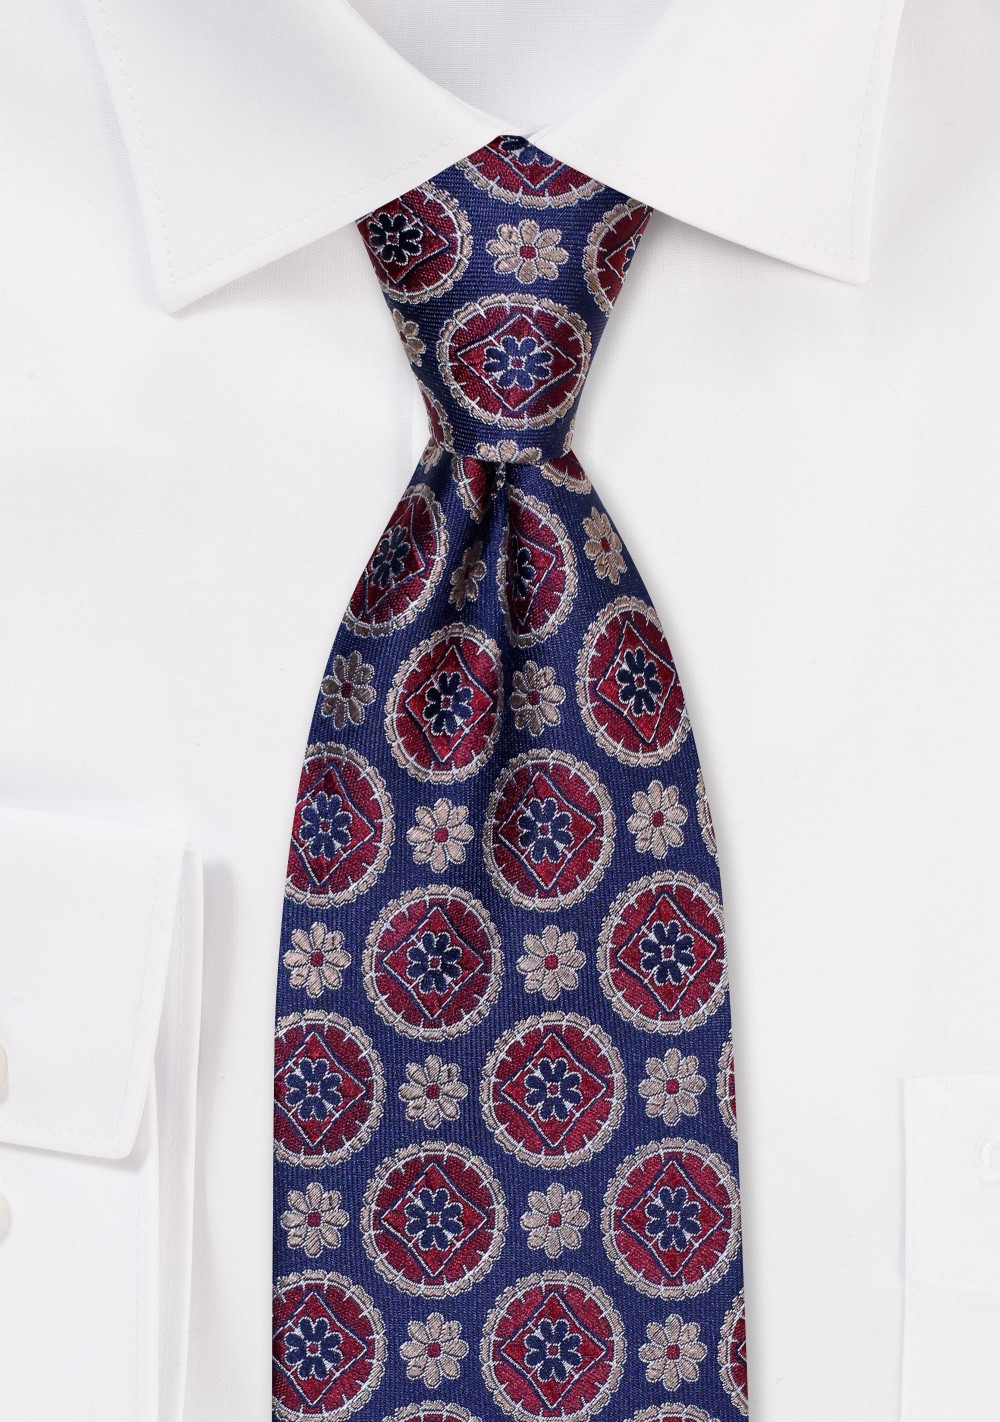 Navy Silk Tie with Wine Colored Medallions